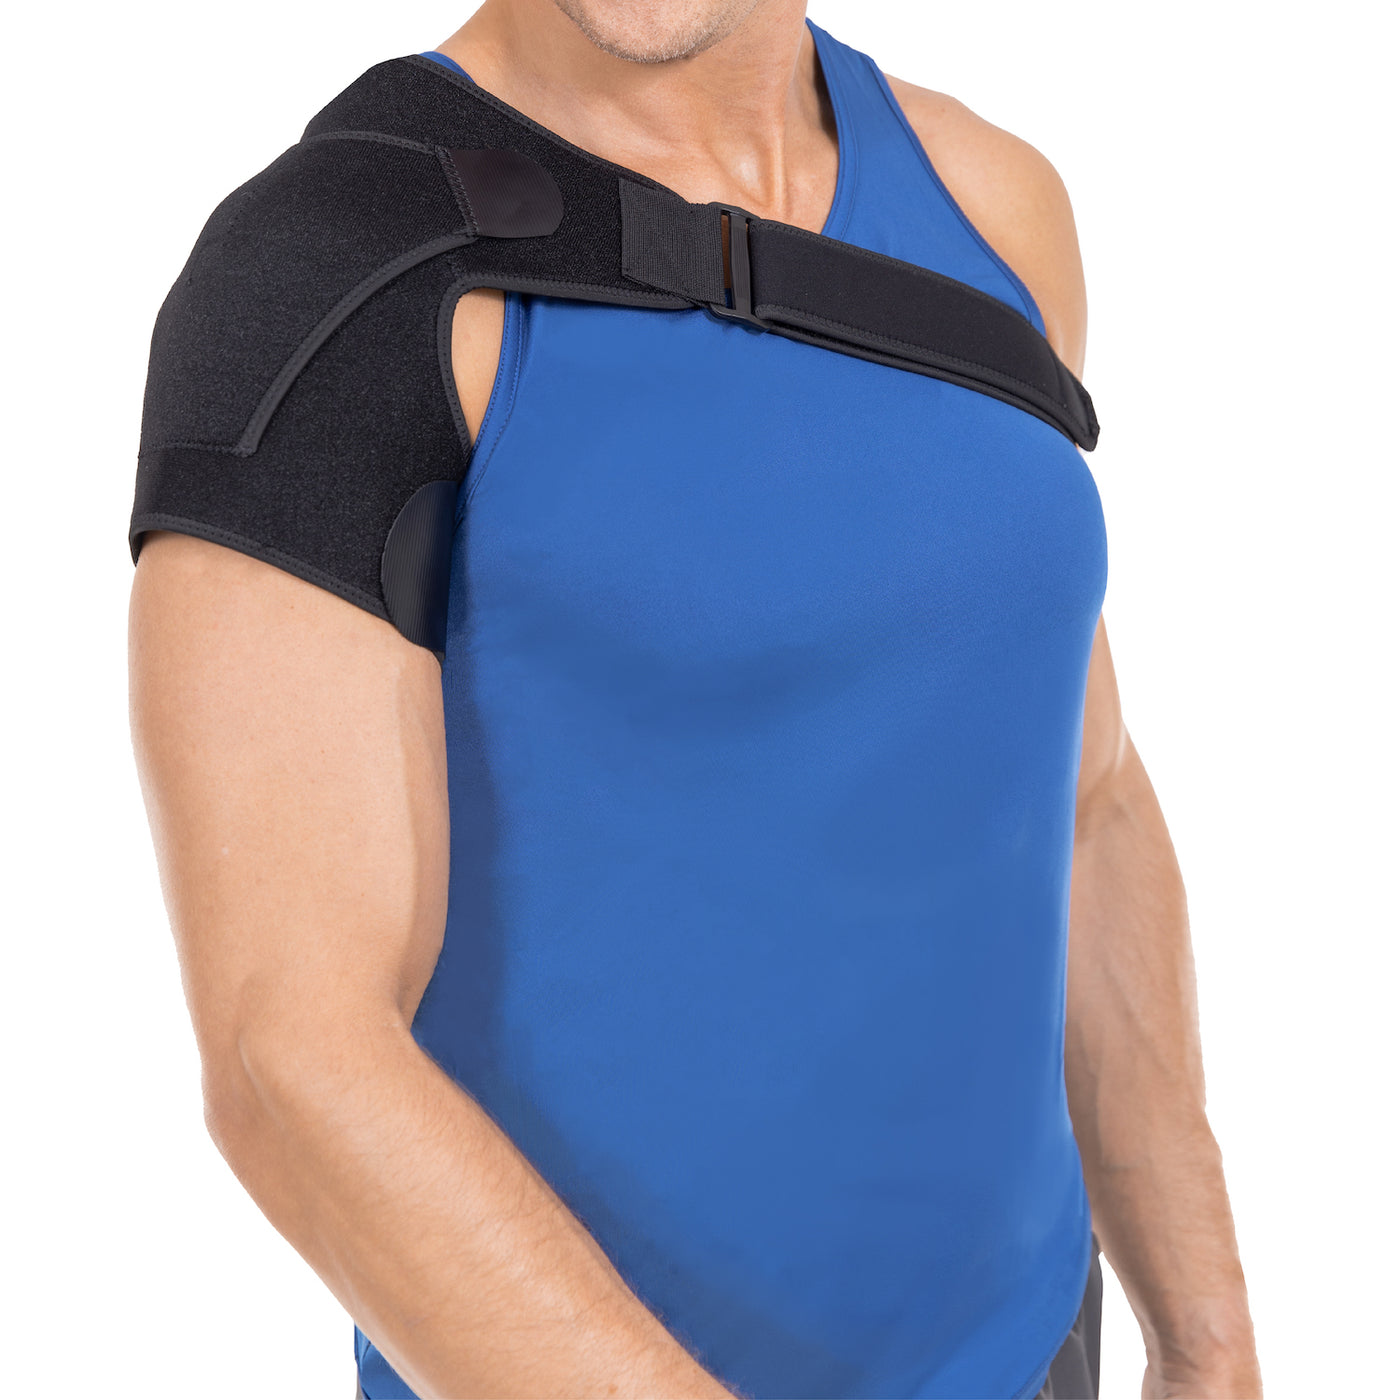 Dropship Shoulder Support Brace Rotator Cuff Support Wrap Strap Compression  Therapy Sleeve With Adjustable Straps For Arthritis Bursitis Tendonitis Arm  AC Joint Injury Clavicle to Sell Online at a Lower Price